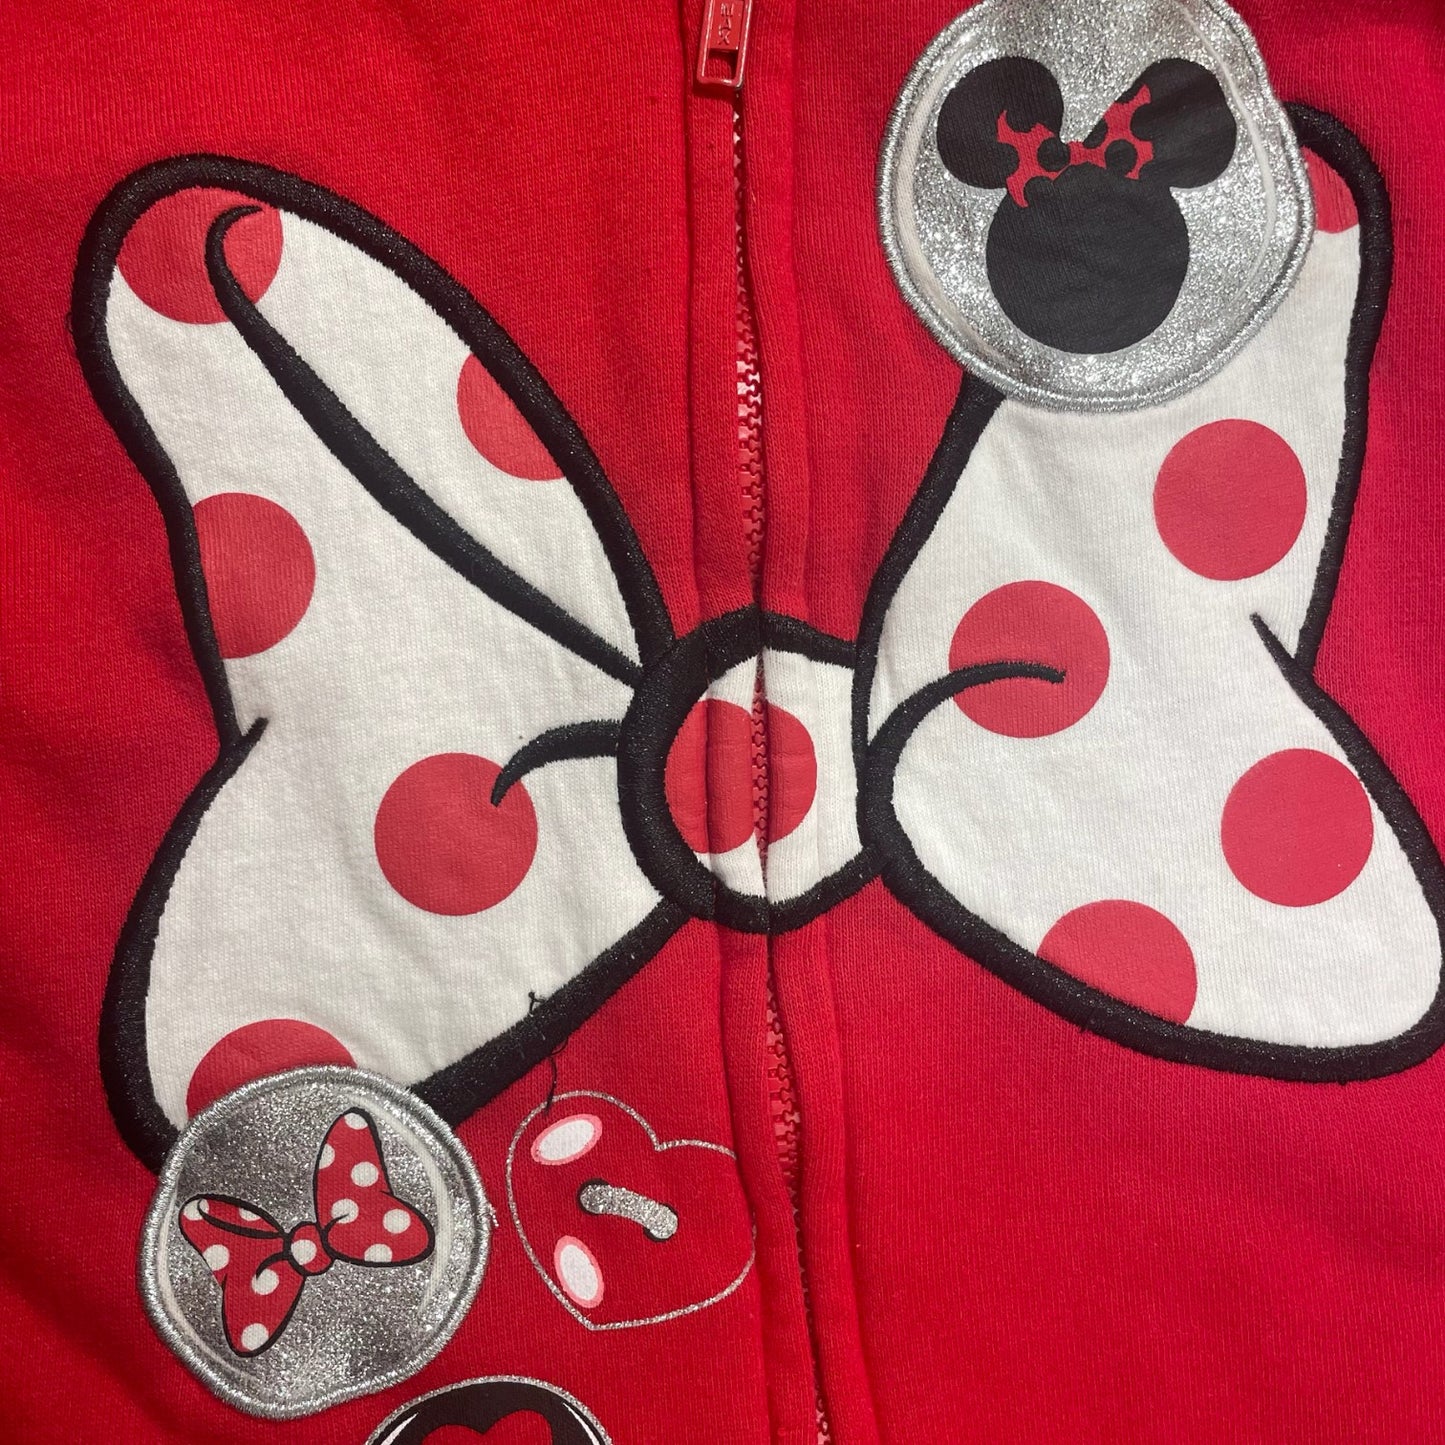 Disney Girls Jacket and Hoodie Minnie Mouse Size 7-8